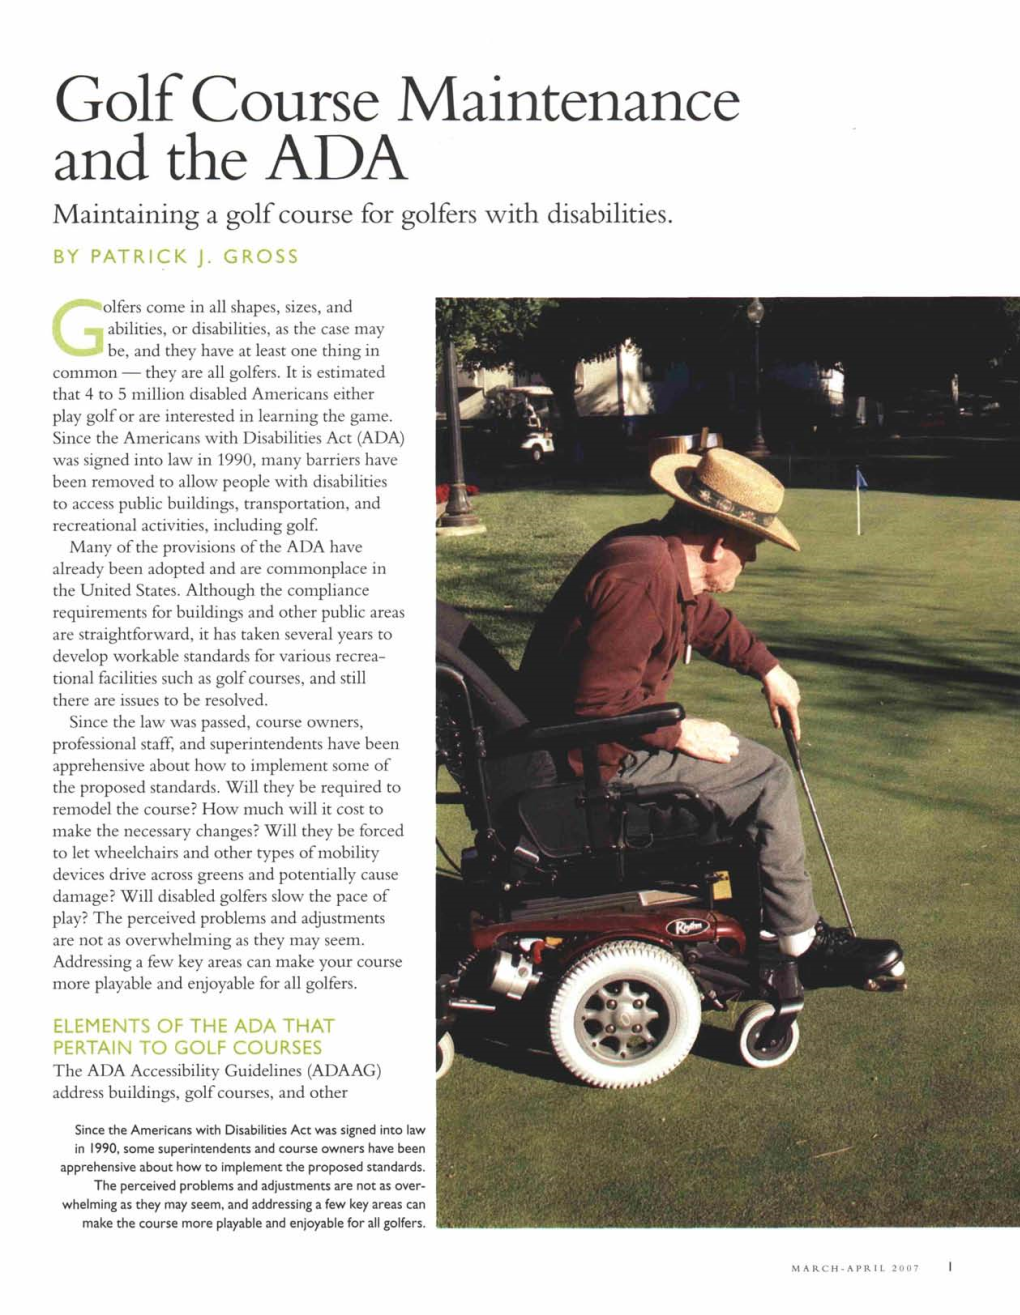 Golf Course Maintenance and the ADA Maintaining a Golf Course for Golfers with Disabilities